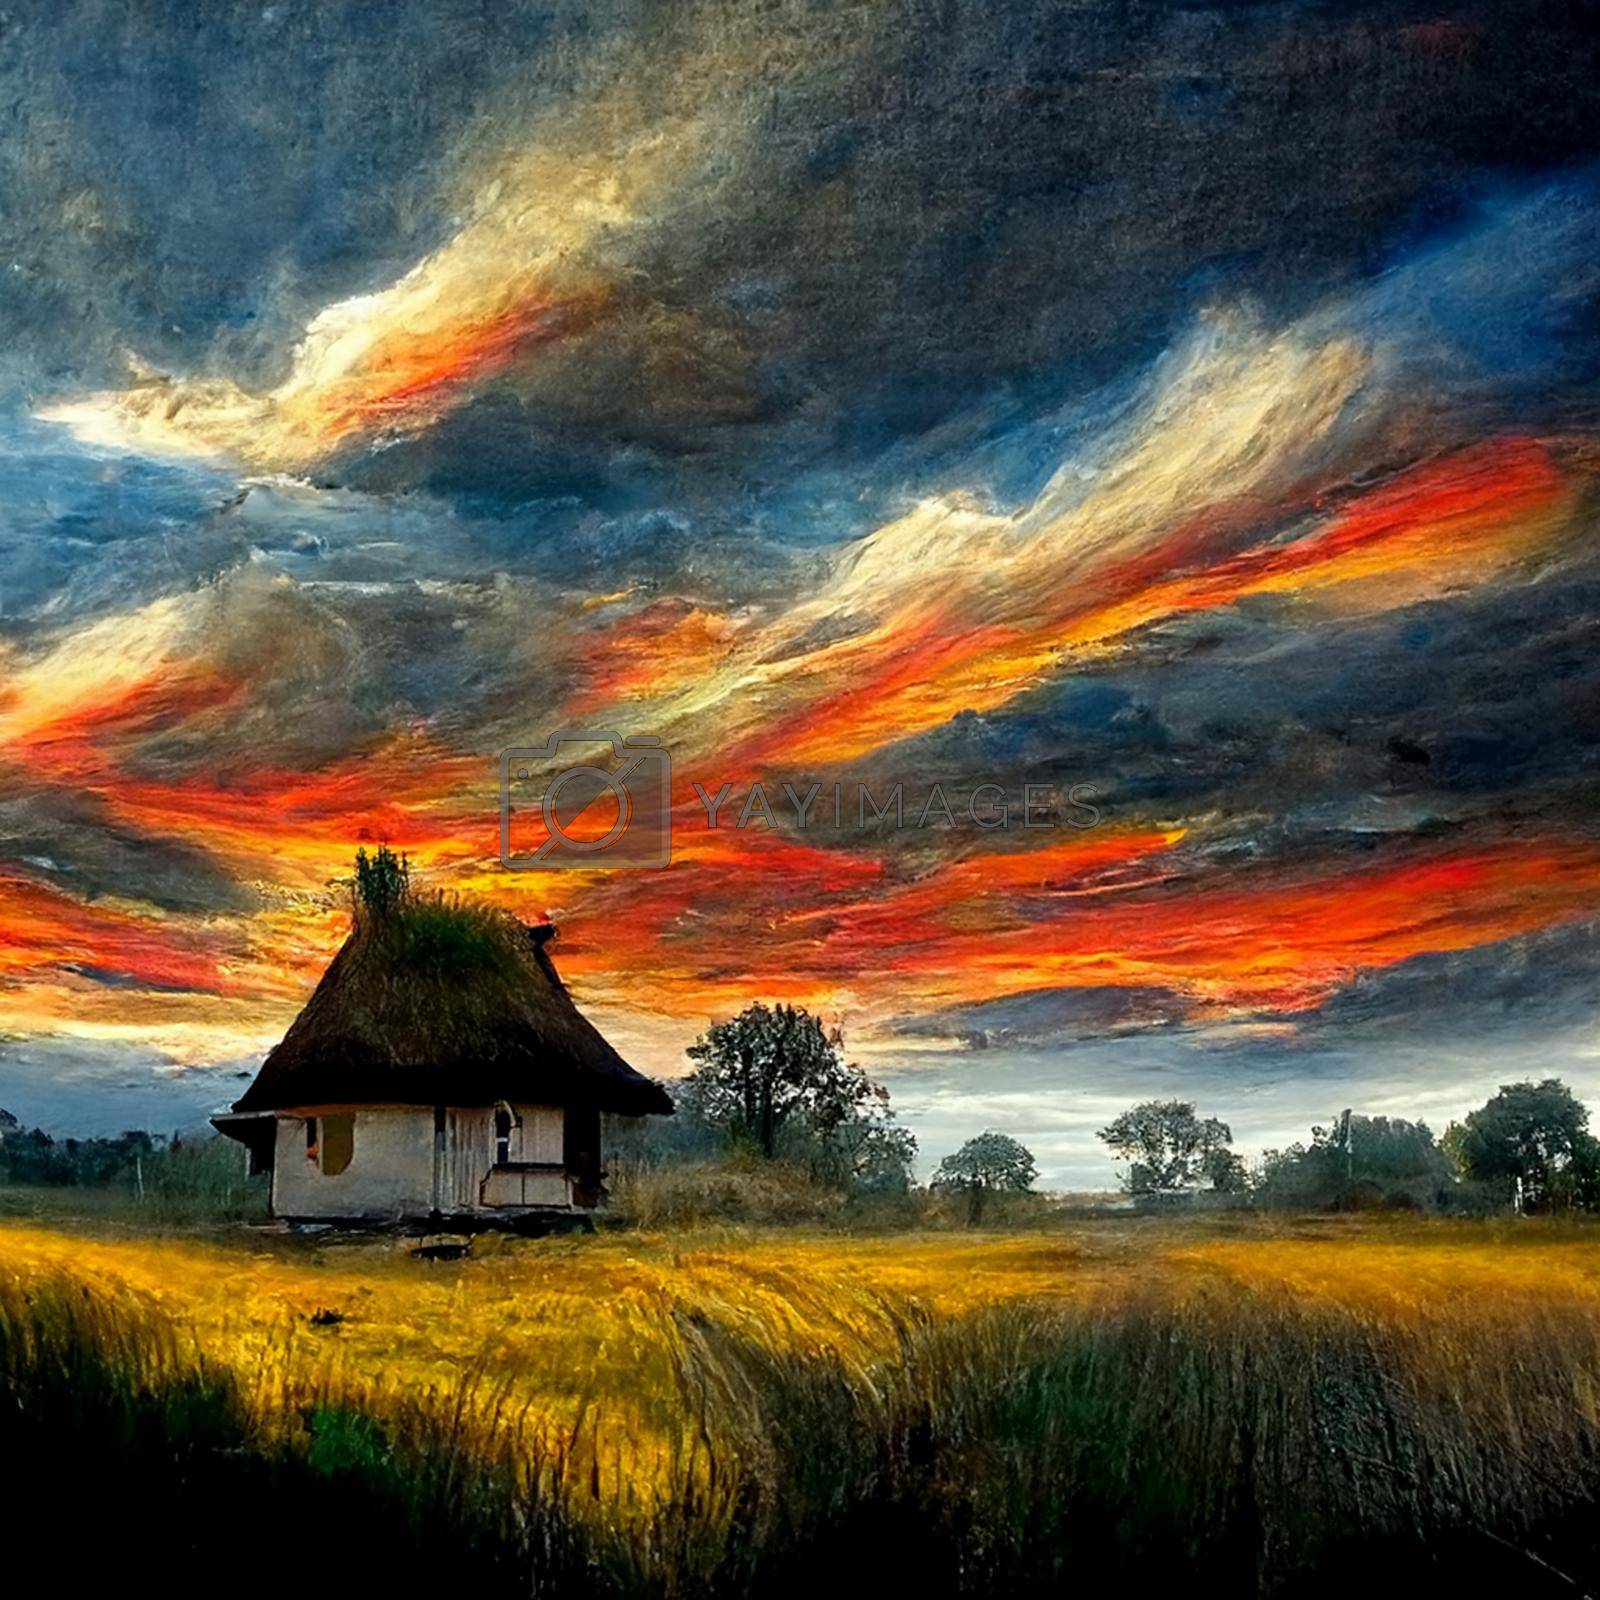 Sunset countryside landscape with farm, agriculture field and house. Digital generated illustration of rural scene, farmland with granary, meadow, fence in orange sun clouds.